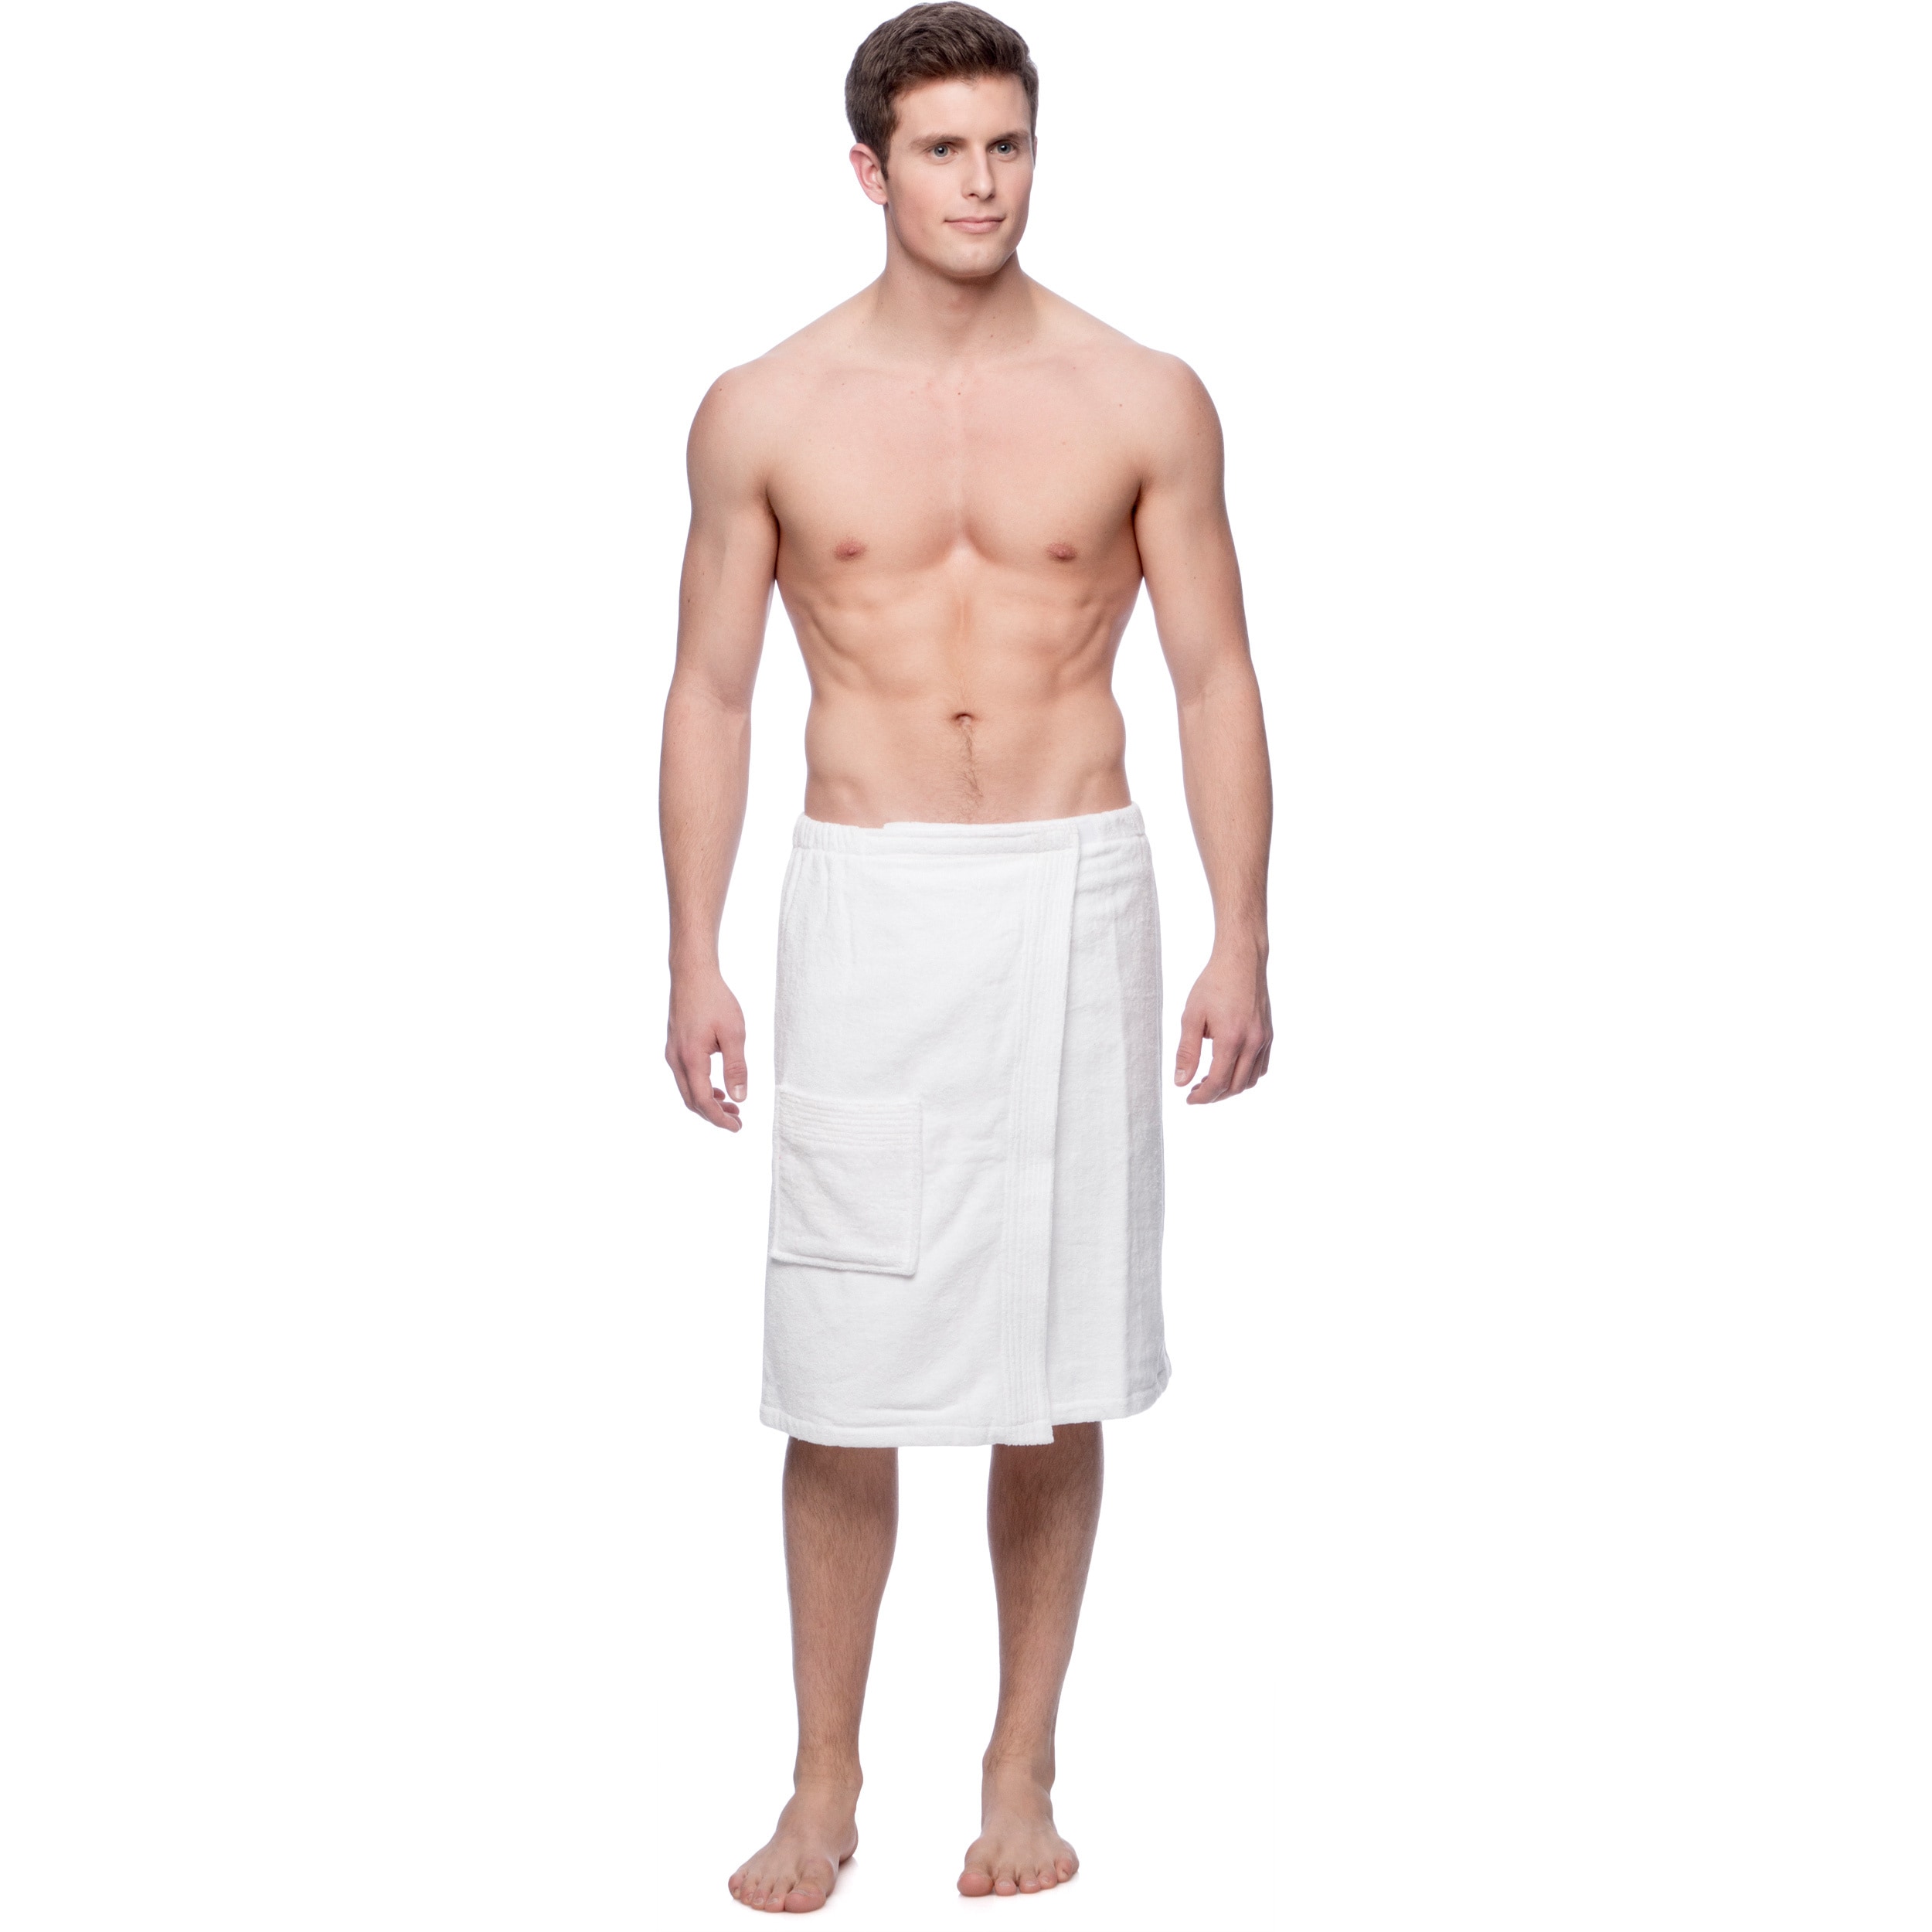 mens shower wrap with snaps